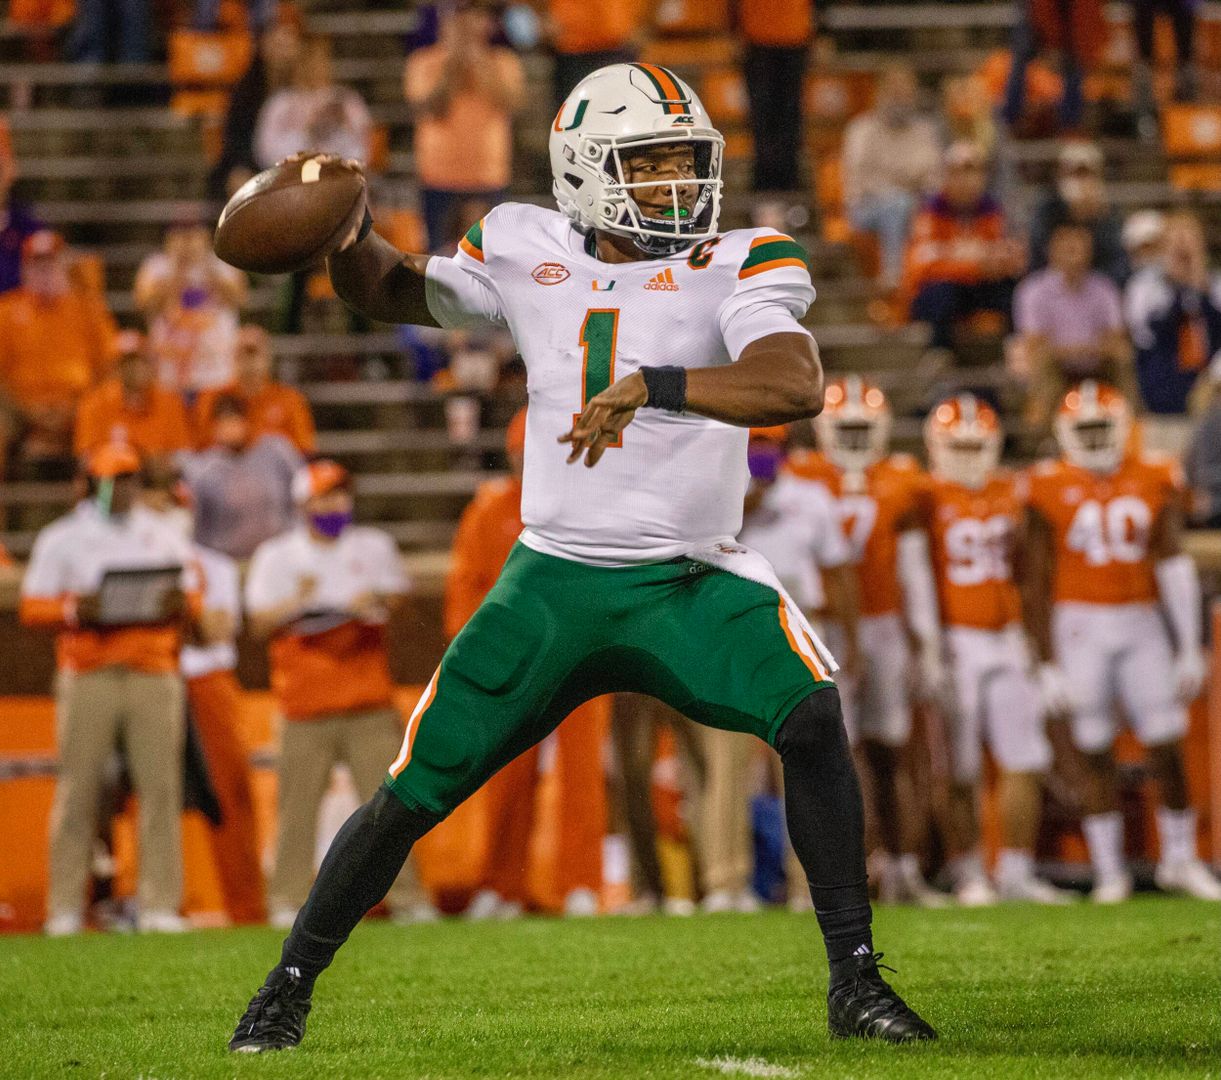 Photo Gallery: Canes Football at Clemson